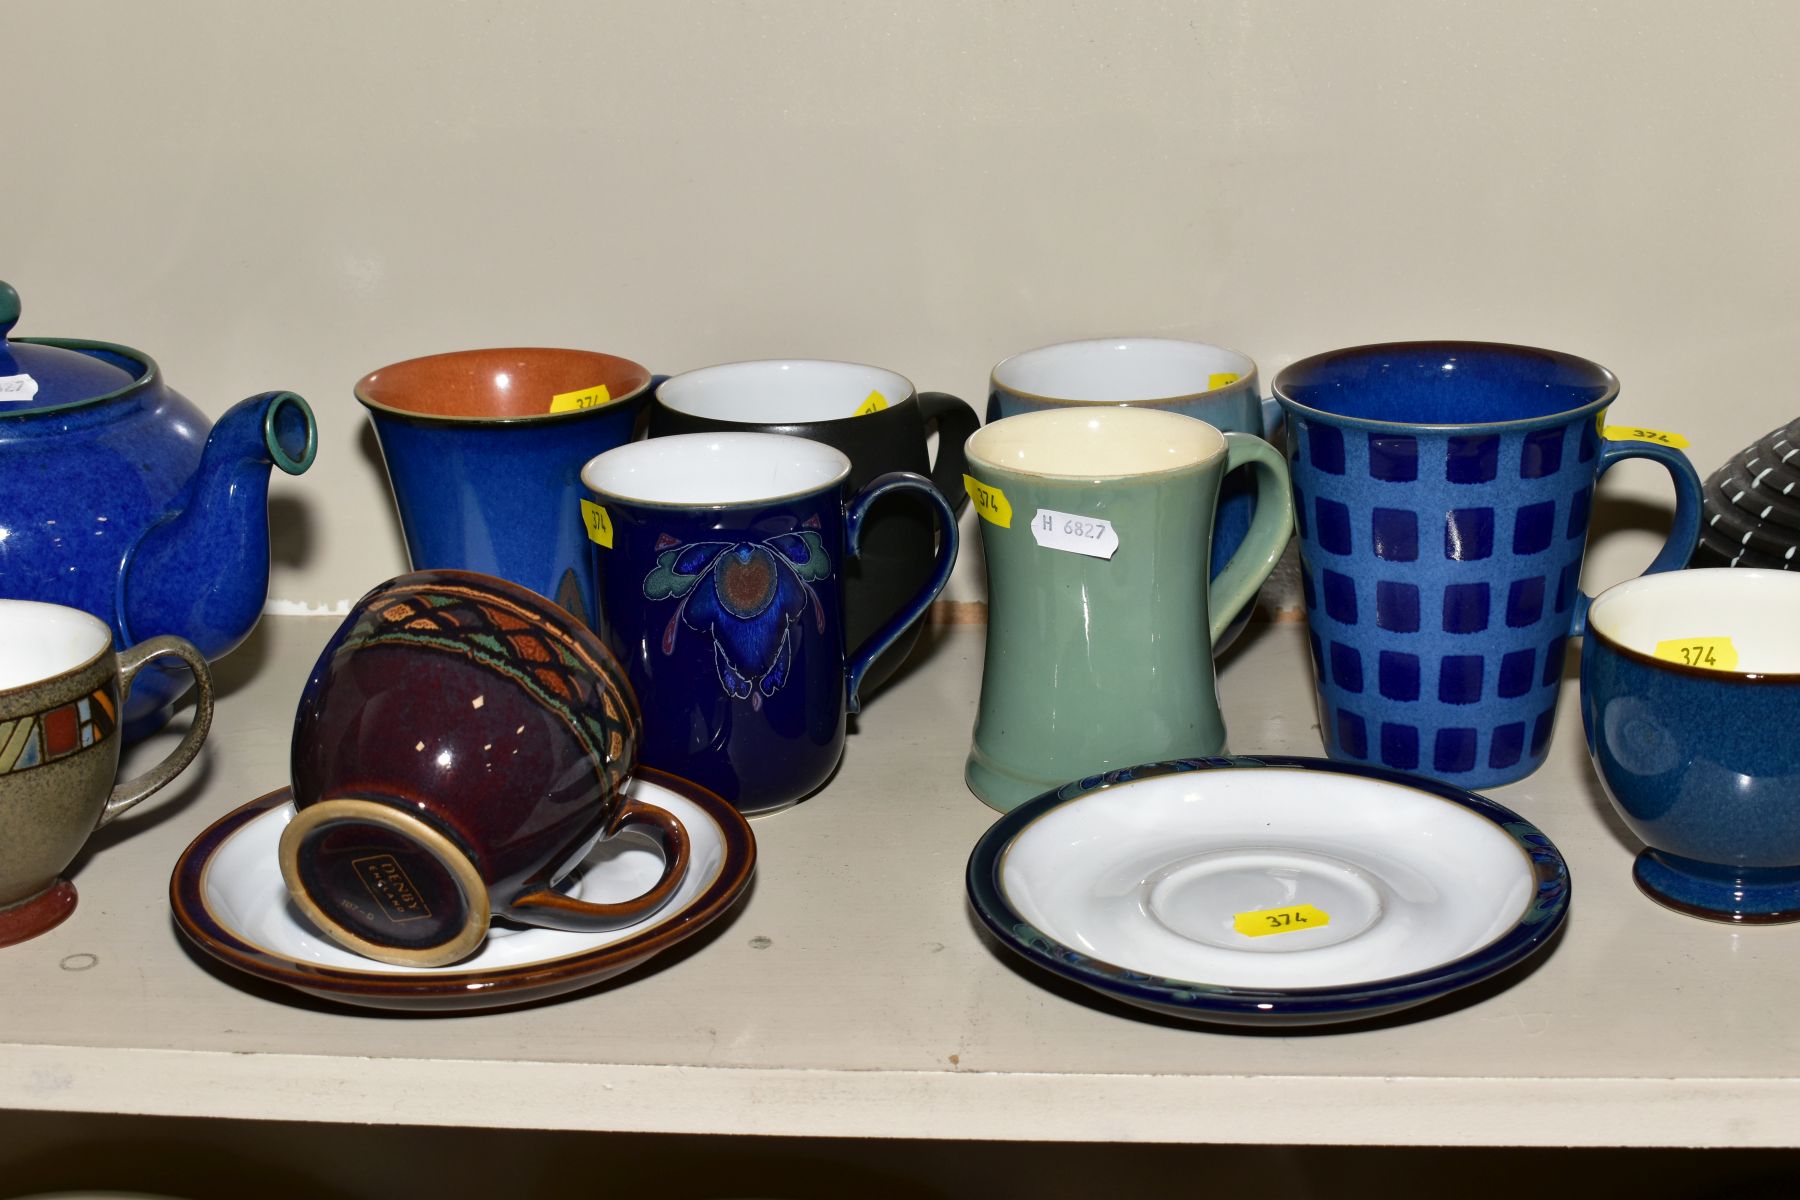 A COLLECTION OF DENBY POTTERY MUGS, TEA POTS, etc, various patterns and glazes, including a coffee - Bild 2 aus 4